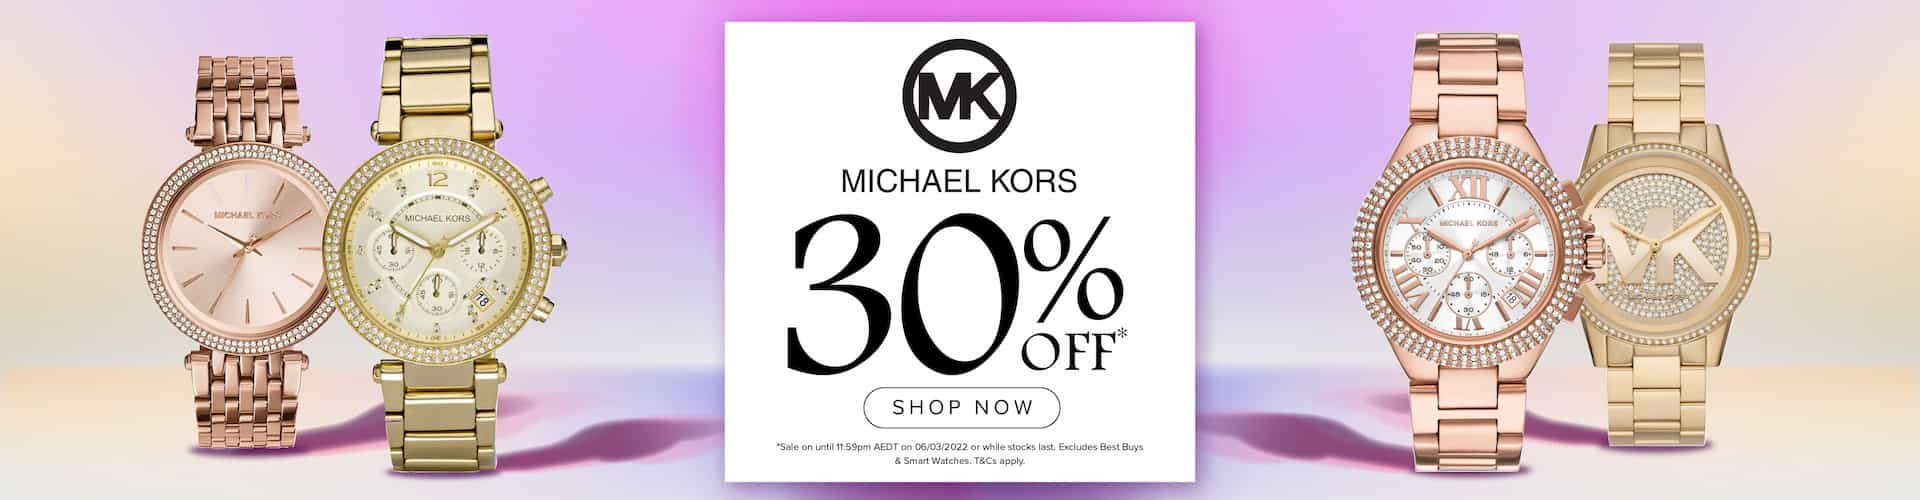 Bevilles 30% OFF on Michael Kors watches